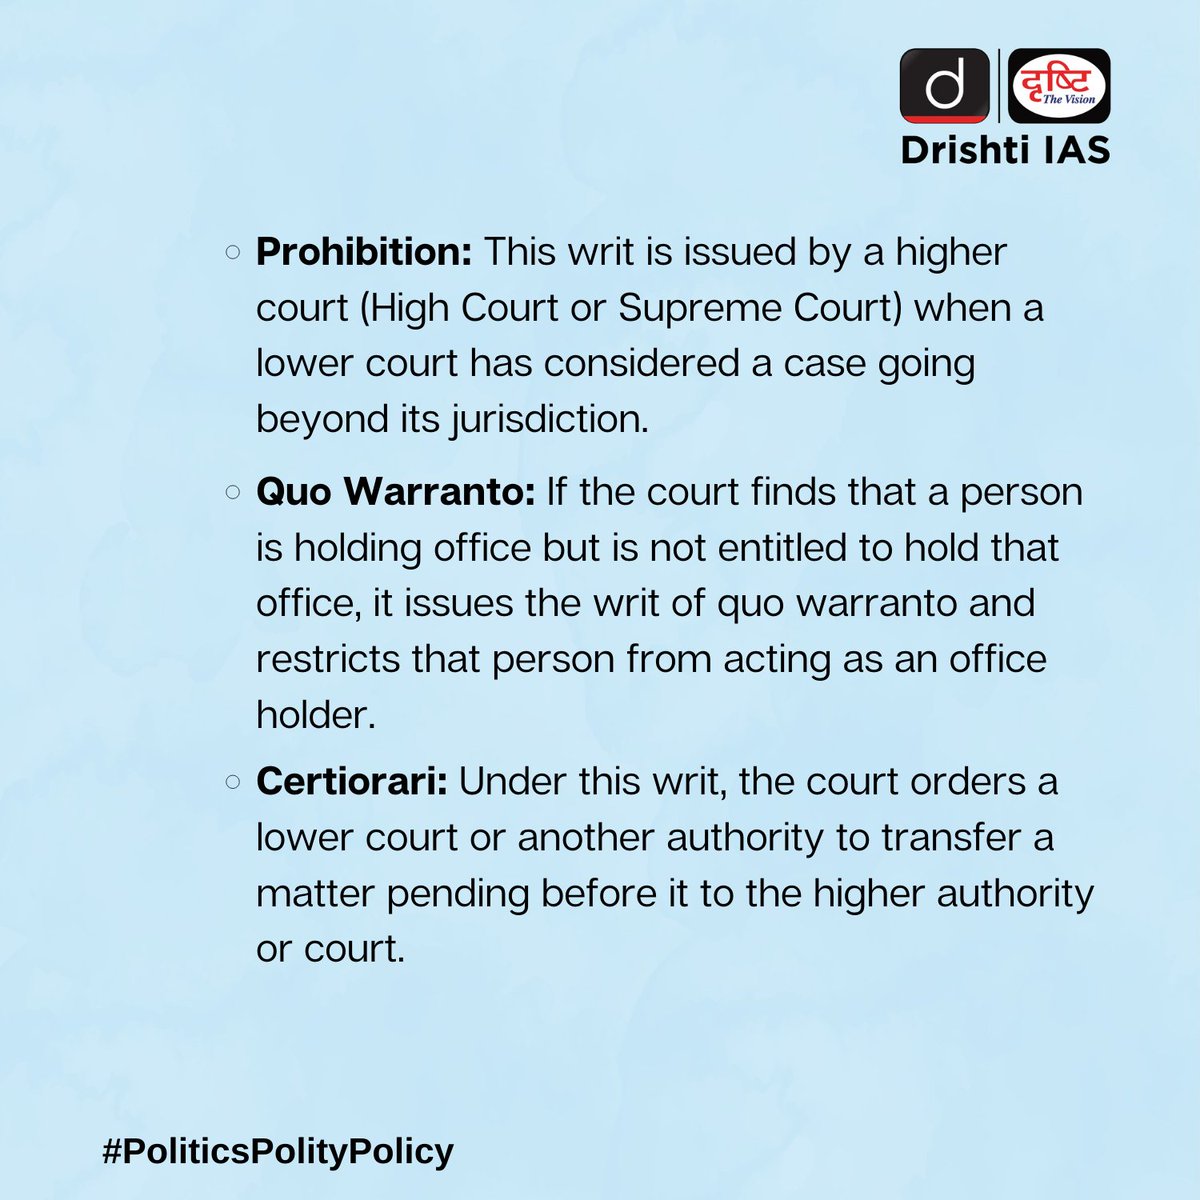 Politics explains the features of policy, outlines the rights of the polity and seeks to cover gaps. Read to engage with #PoliticsPolityPolicy. 
  
#DrishtiGuideToGS #Polity #Writs #Article32 #UPSC #IAS #CSE #PCS #UPSCPrelims #Prelims2023 #UPSC2023 #DrishtiIAS #DrishtiIASEnglish